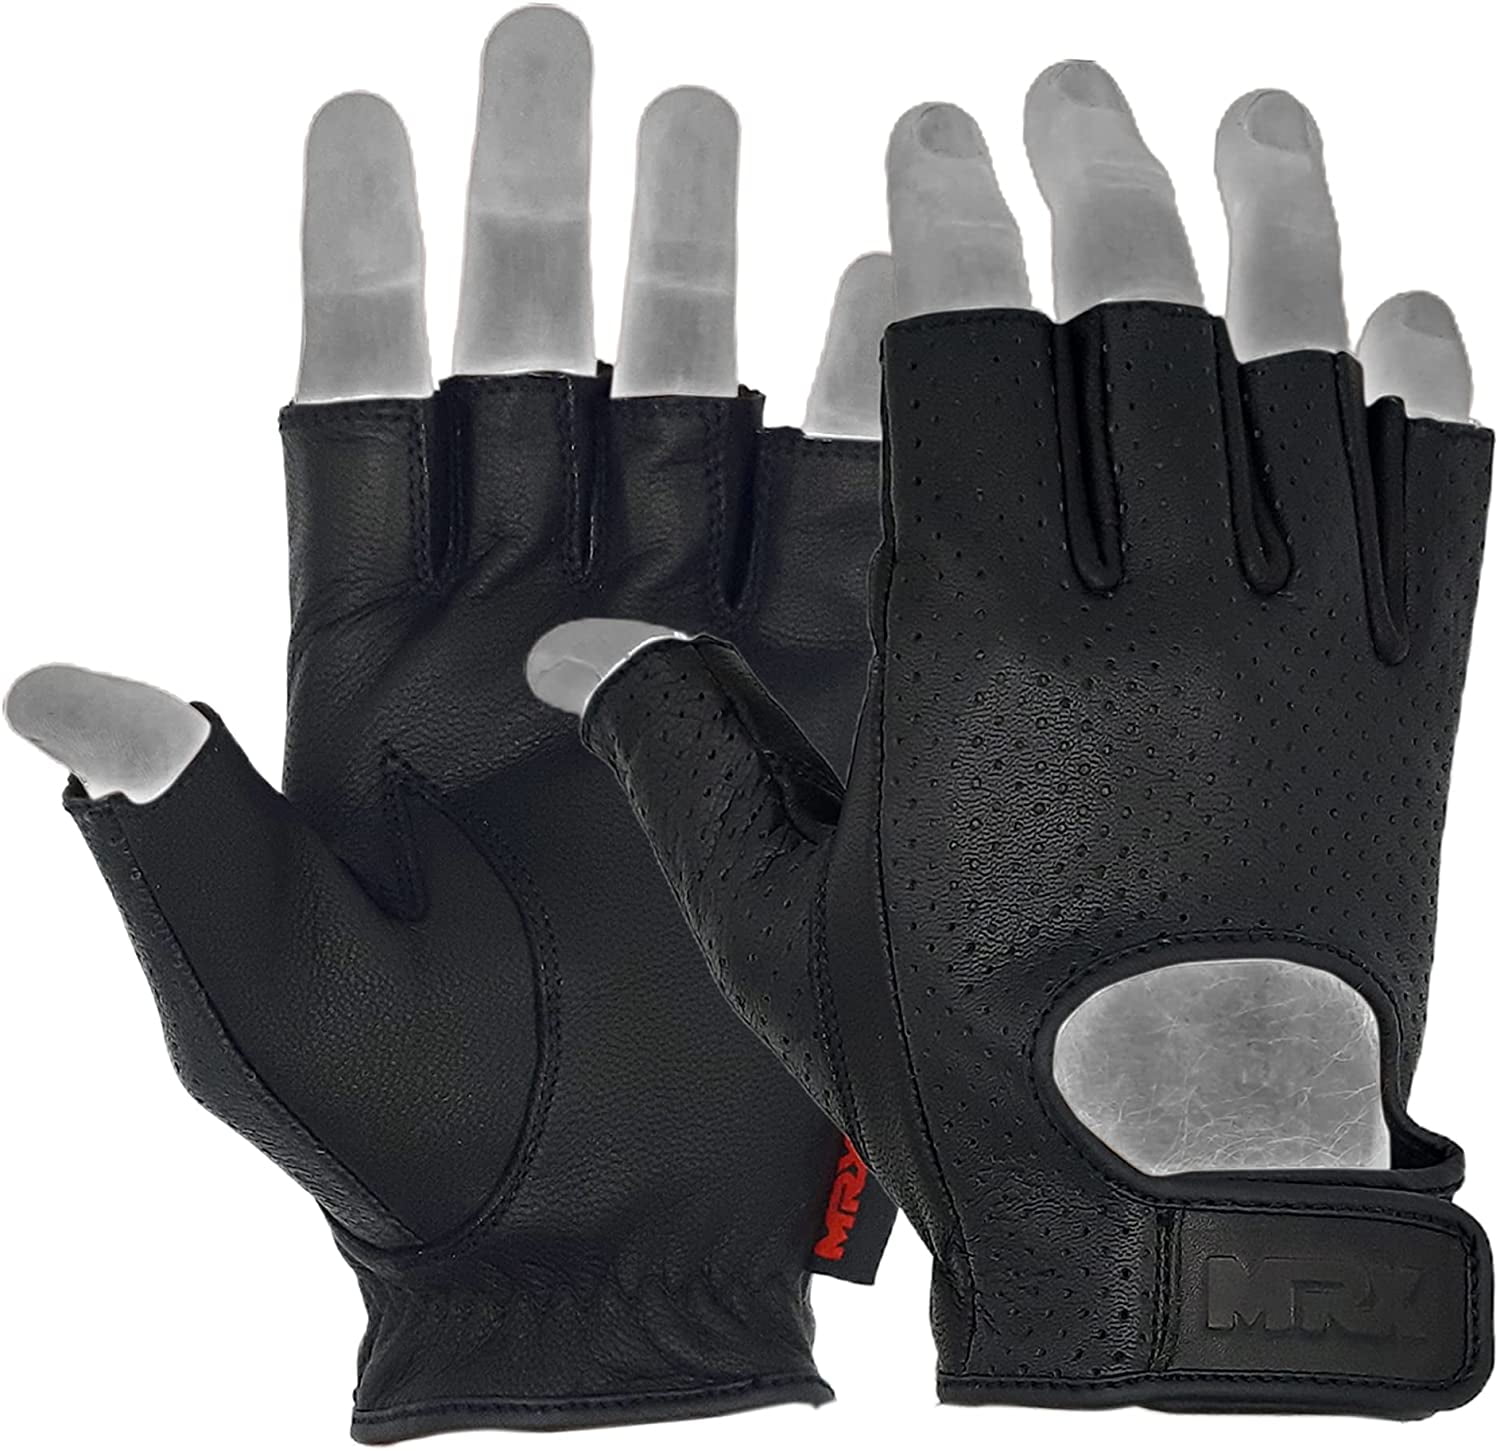 Weight Lifting Gloves Cut Finger Cycling Bus Driving Real Leather Palm Back Mesh 